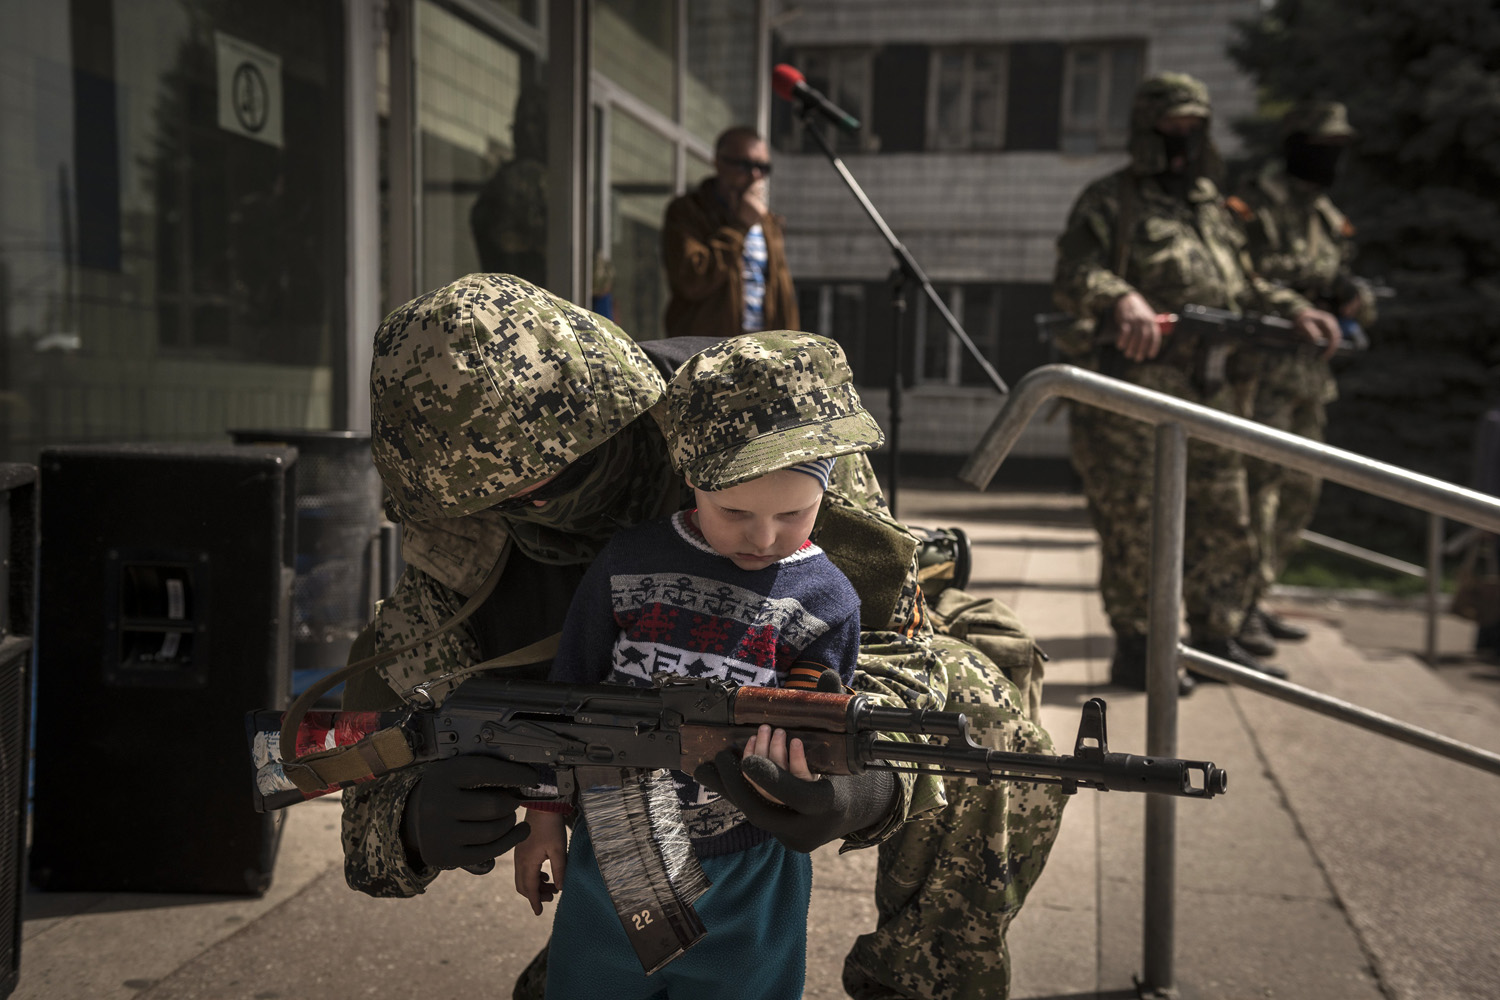 A pro-Russia militia member standing guard outside a seized government building allows a child to partially hold his gun.